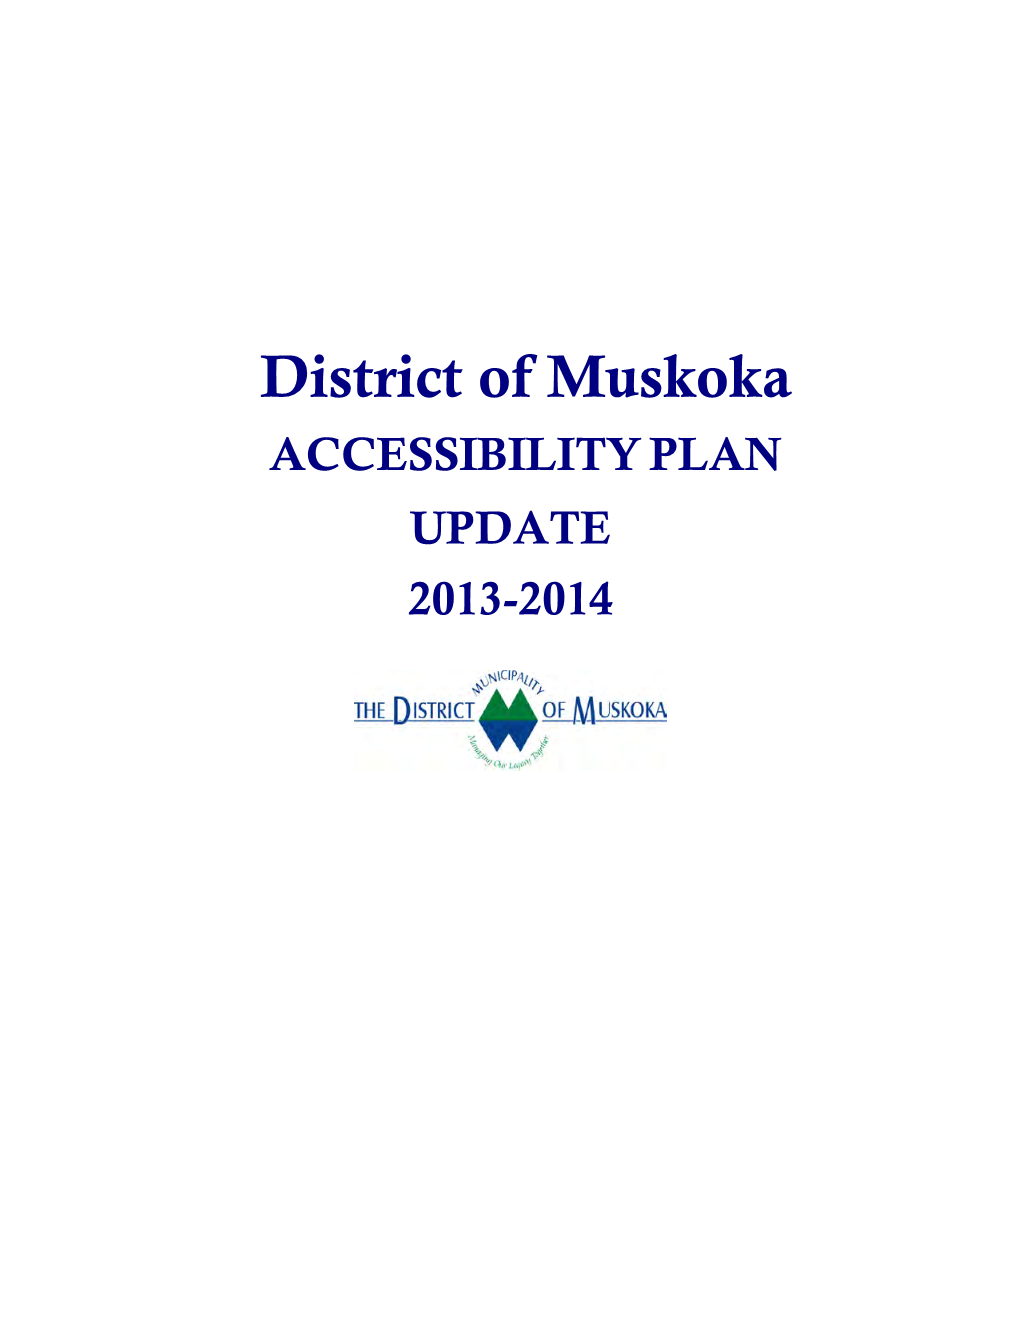 District of Muskoka ACCESSIBILITY PLAN UPDATE 2013-2014